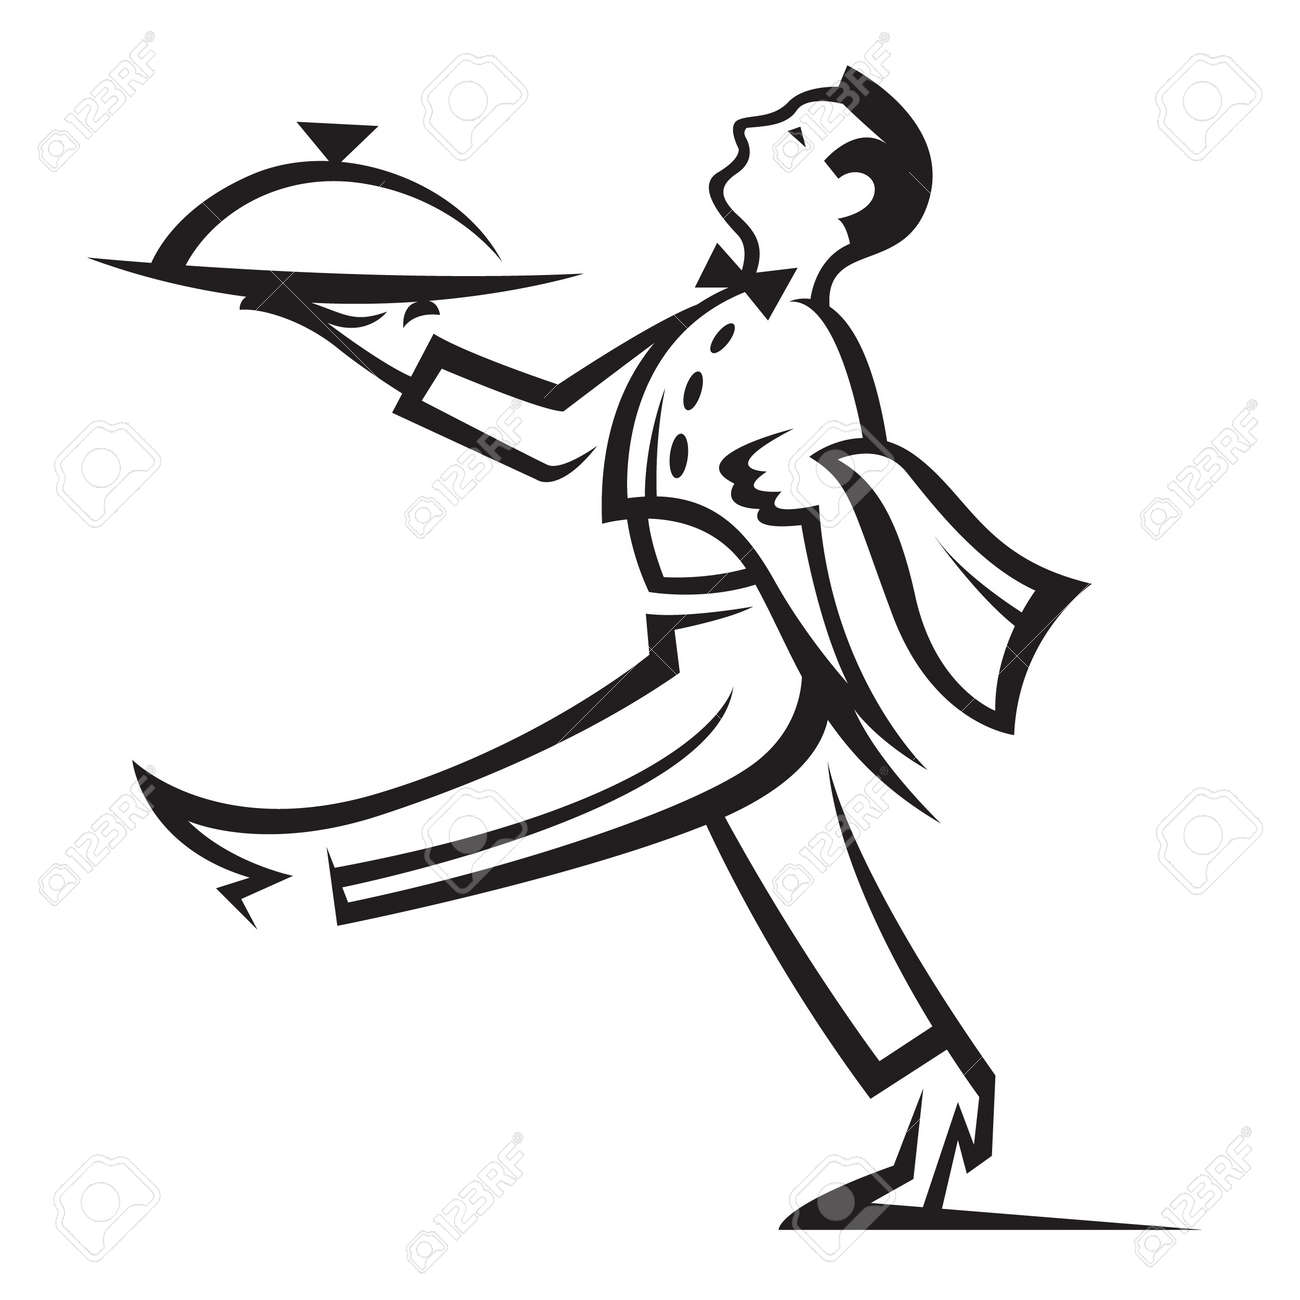 11650129-waiter-with-tray-of-food-in-hand-Stock-Vector-catering.jpg